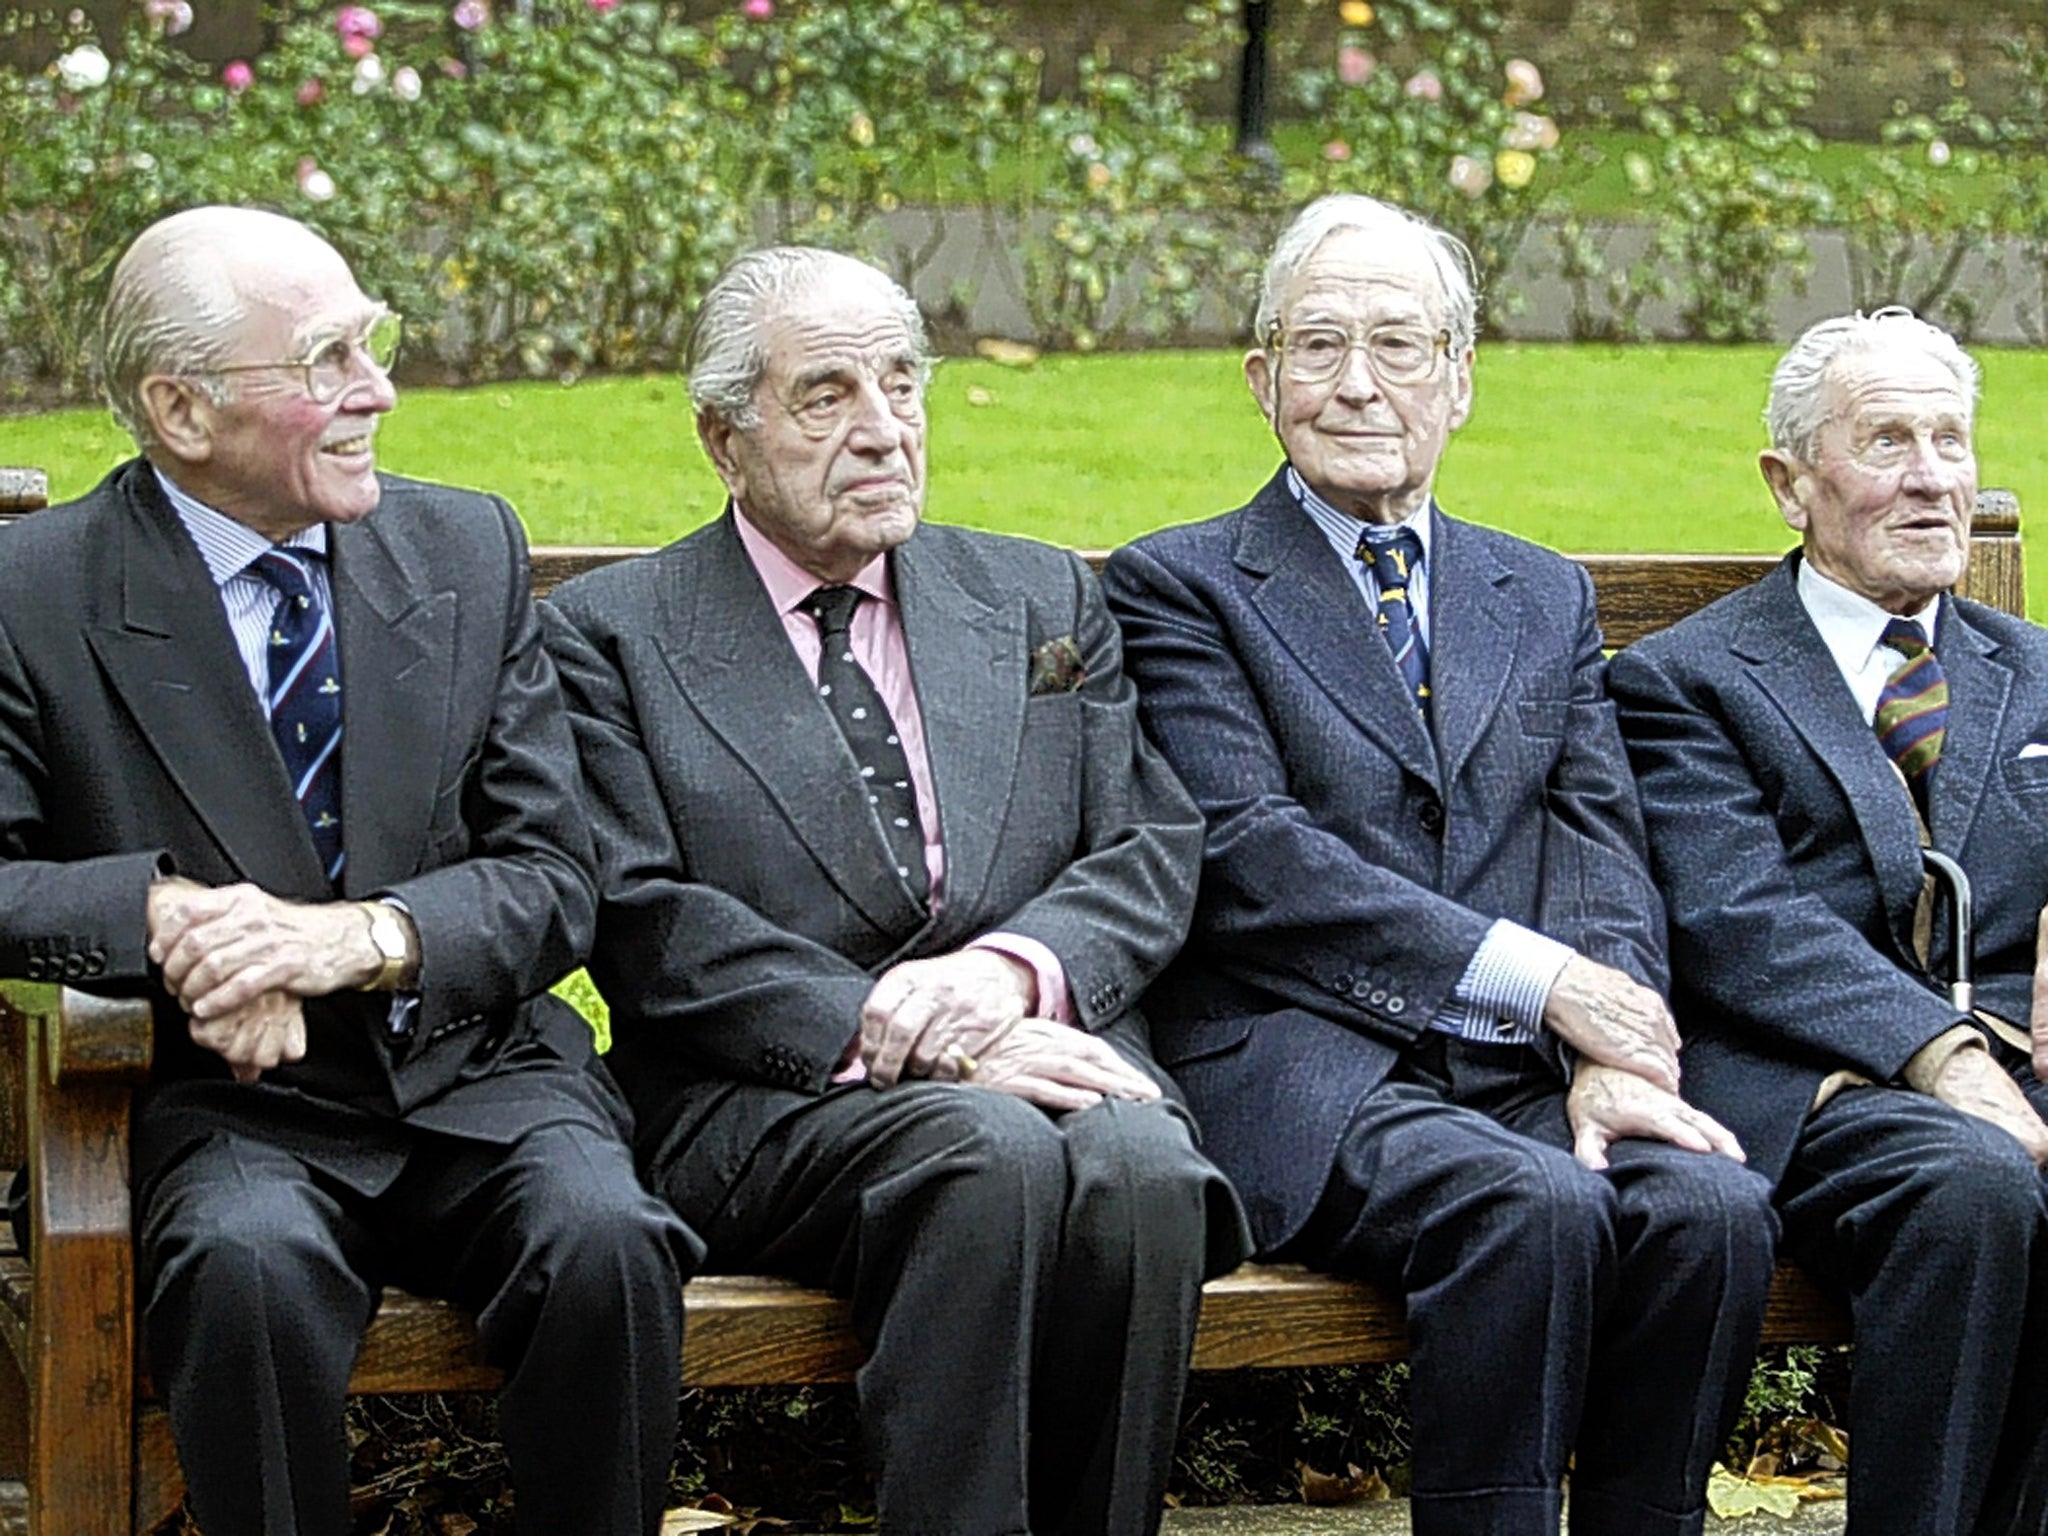 Veterans of the Great Escape and Colditz gather for the exhibition 'Great Escapes' at the Imperial War Museum in London in 2004, left to right: Alan Bryett, Campbell, Jimmy James and Keith Lockwood